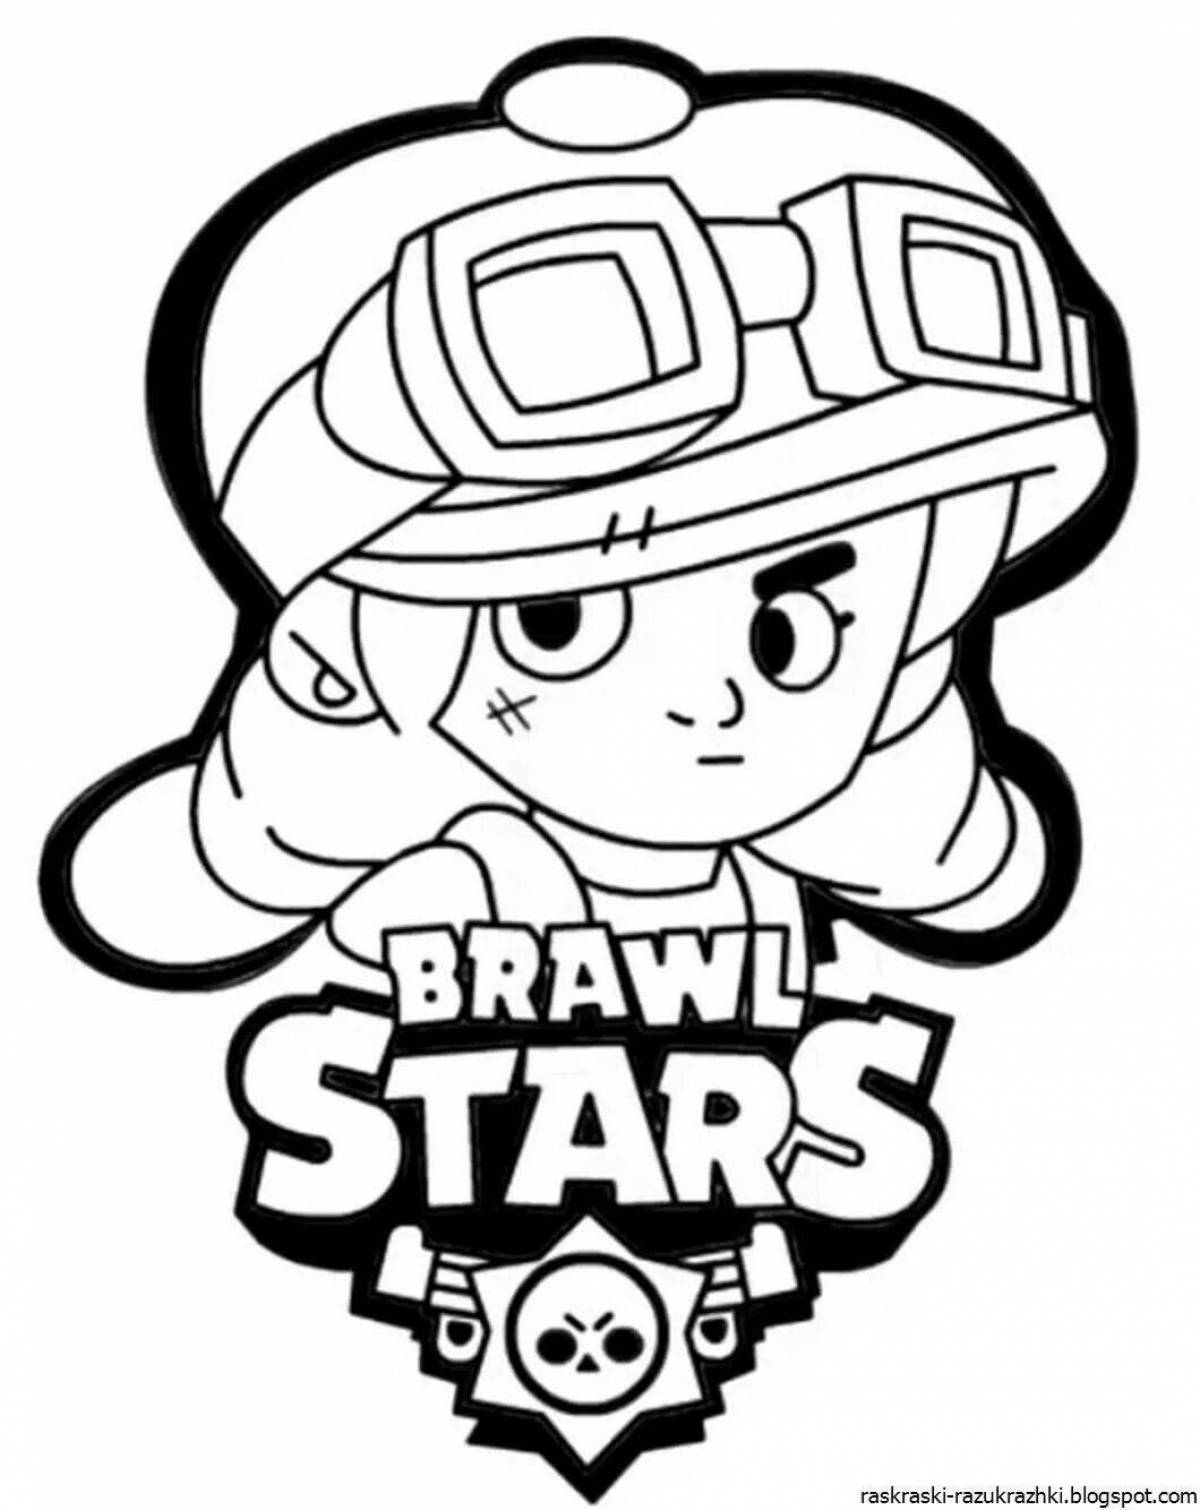 Easy coloring browstars game